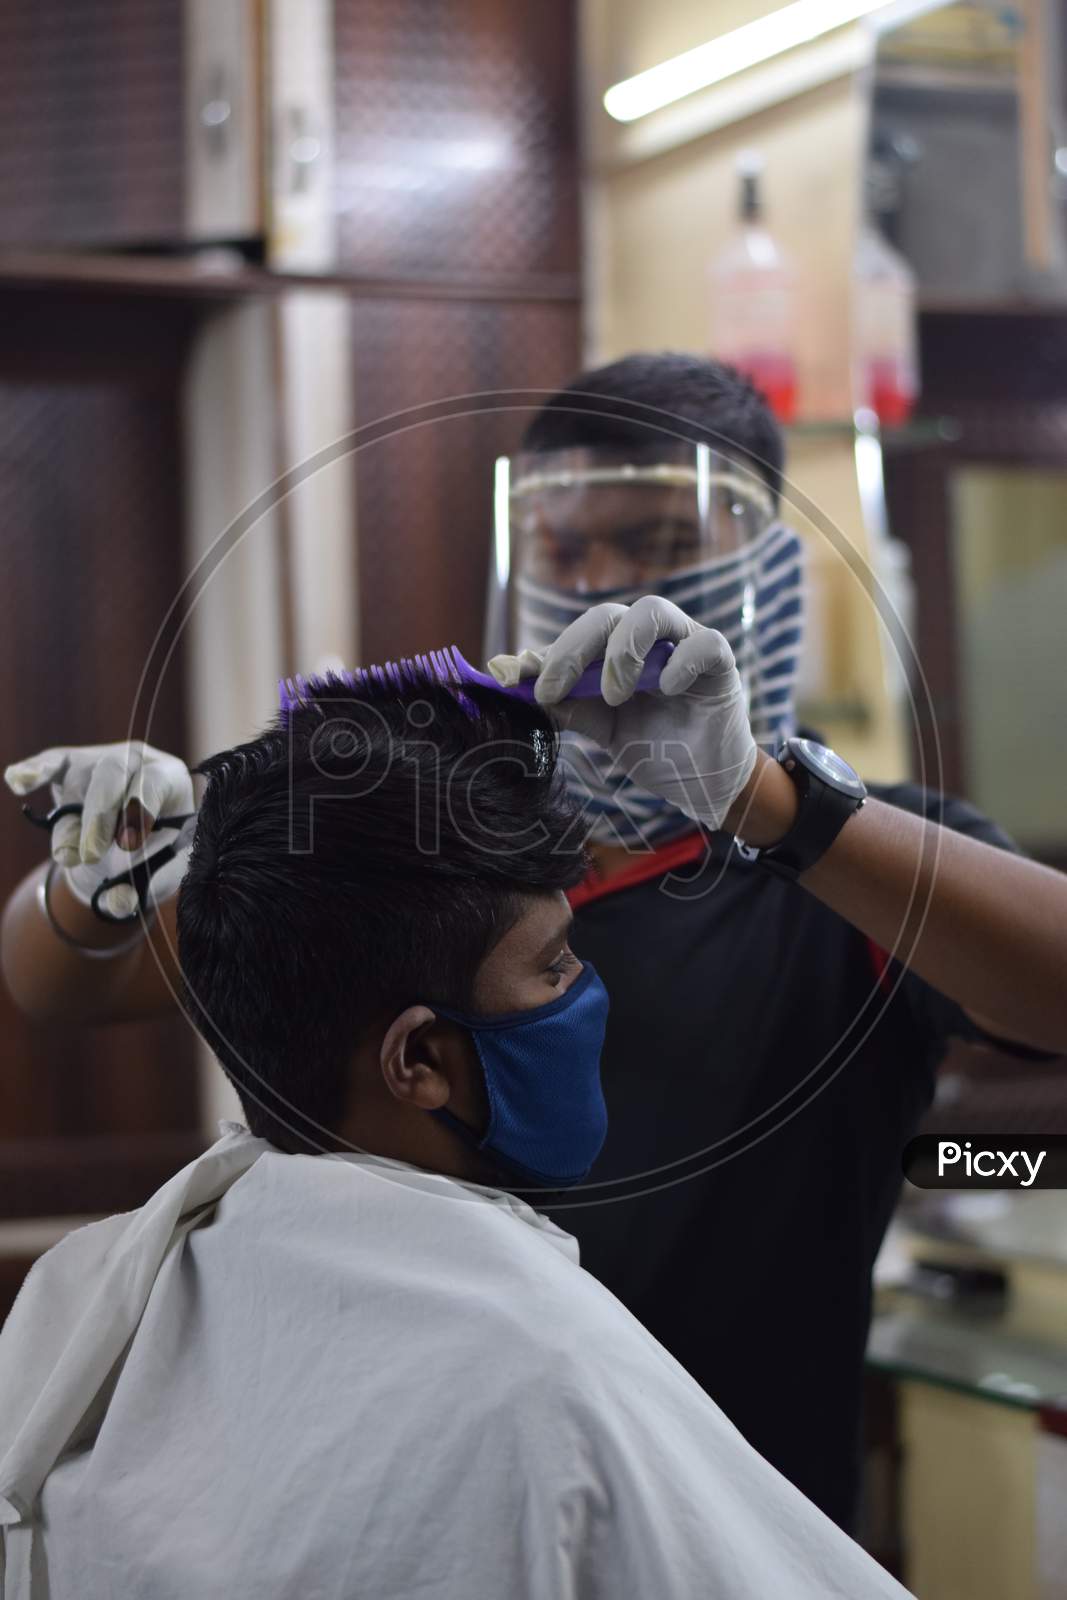 Hyderabad, Telangana, India. july-14-2020: A hairdresser, wearing a protective face mask, works in a barber shop. Reopen after Lockdown for covid-19.